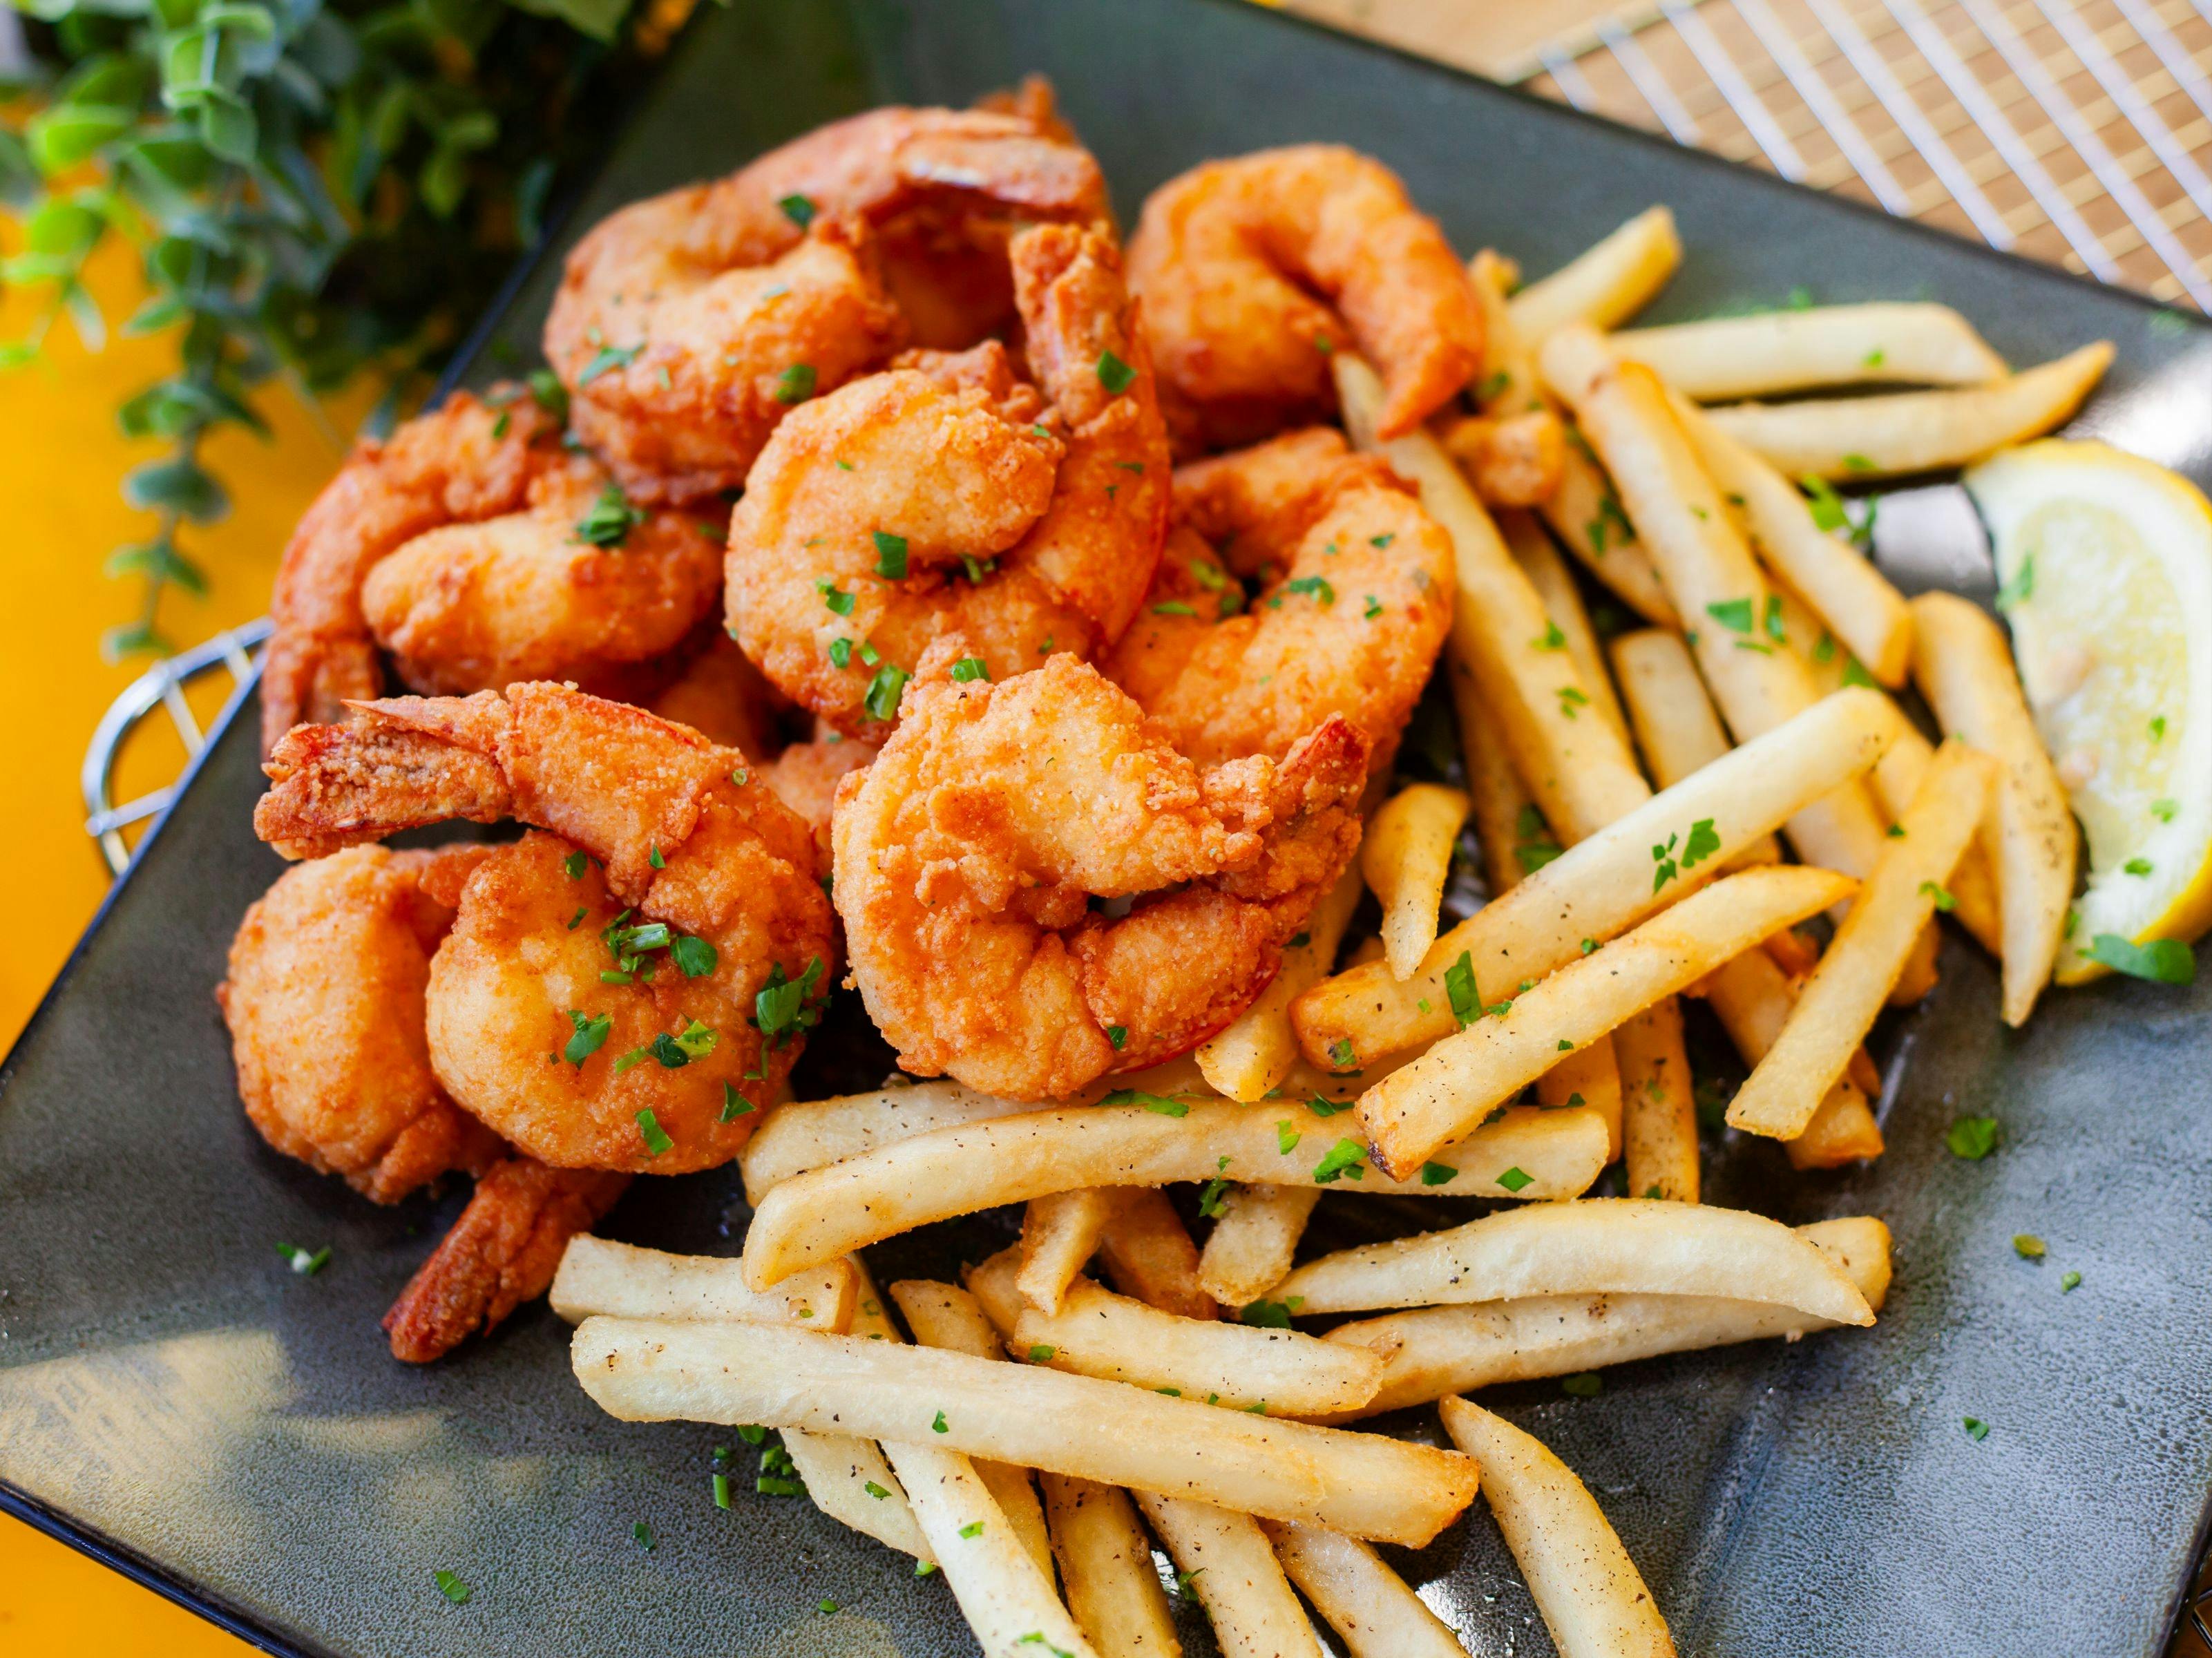 Photo of 'Small Shrimp' meal.